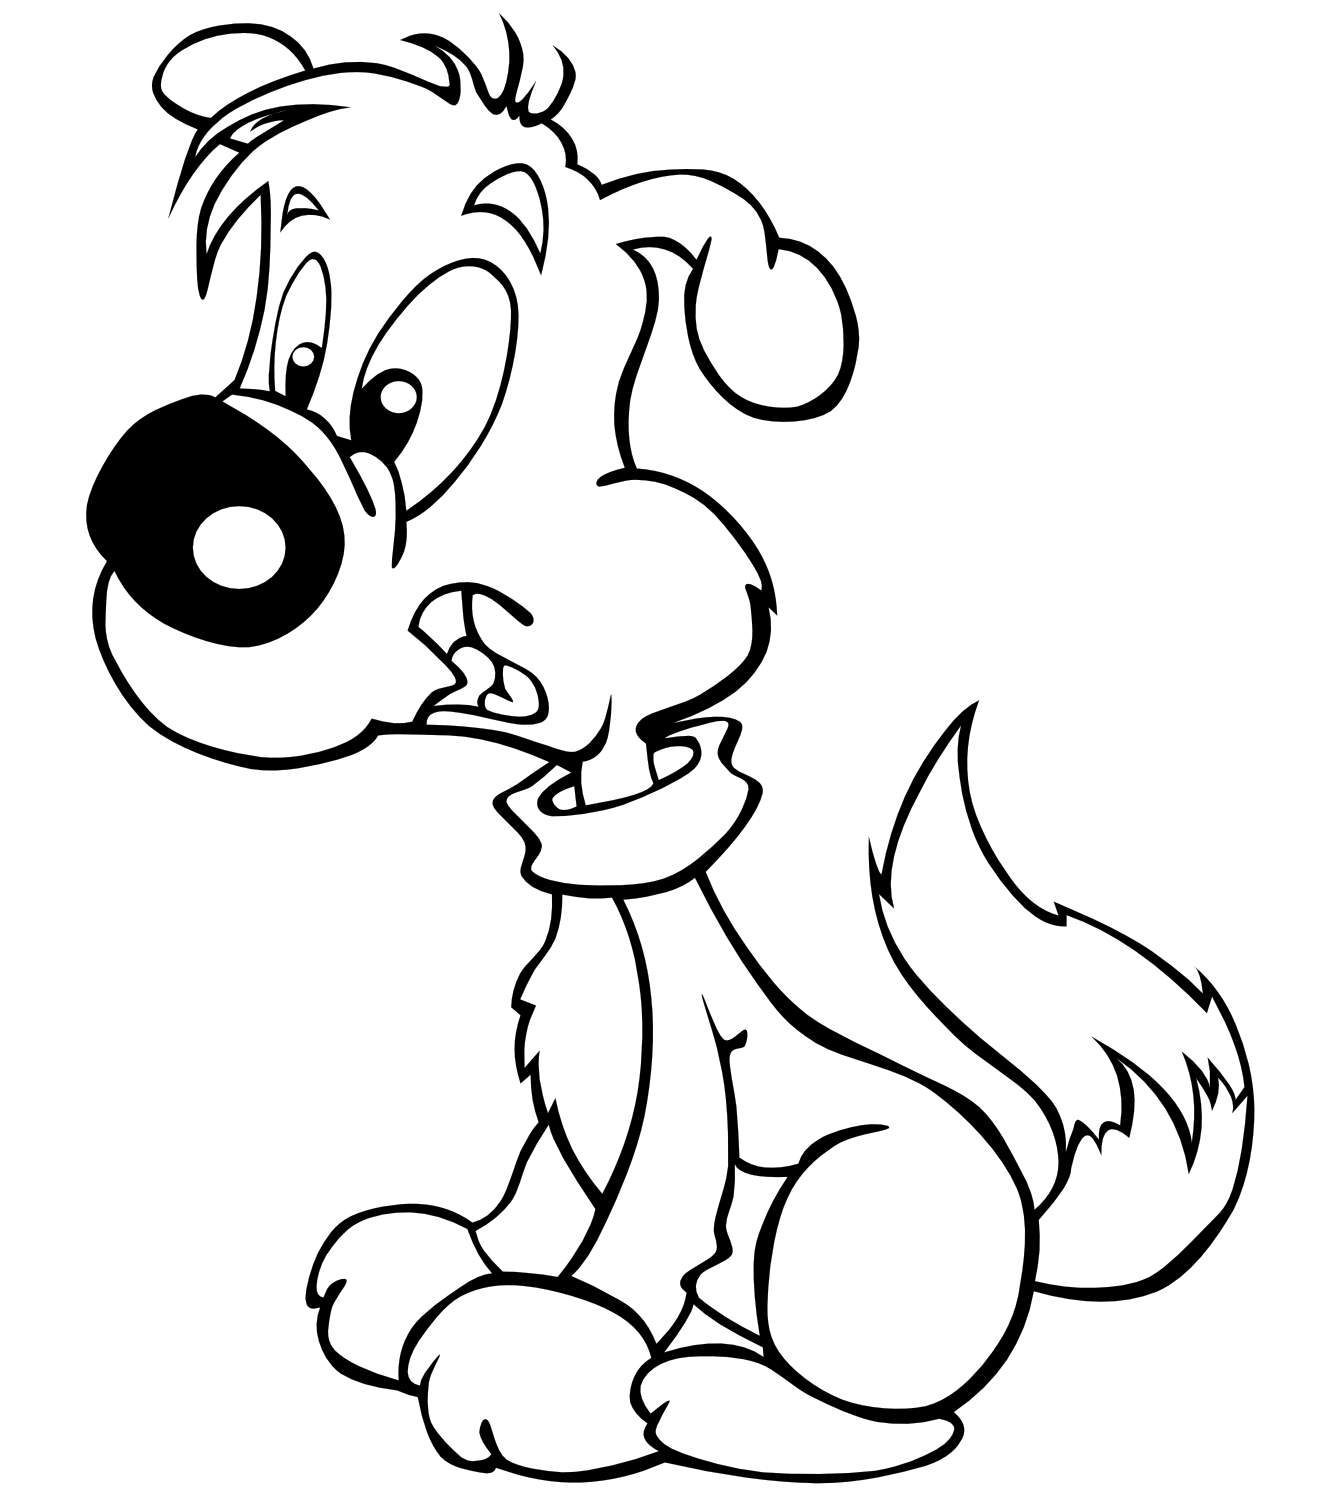 Puppy Cartoon   Free Cliparts That You Can Download To You Computer    